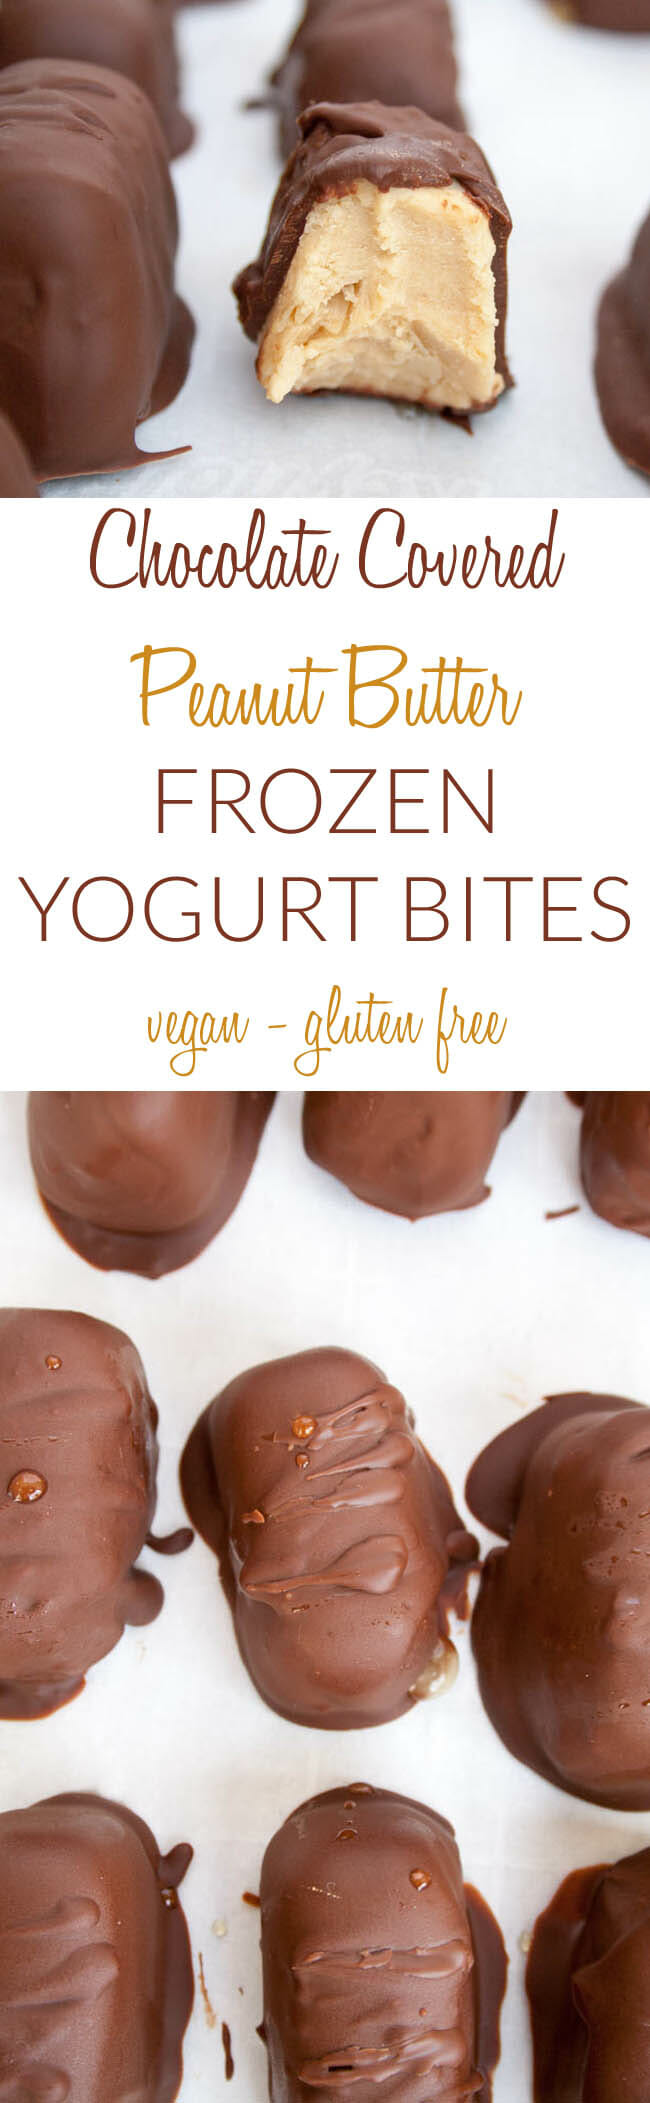 Chocolate Covered Peanut Butter Frozen Yogurt Bites collage photo with text.